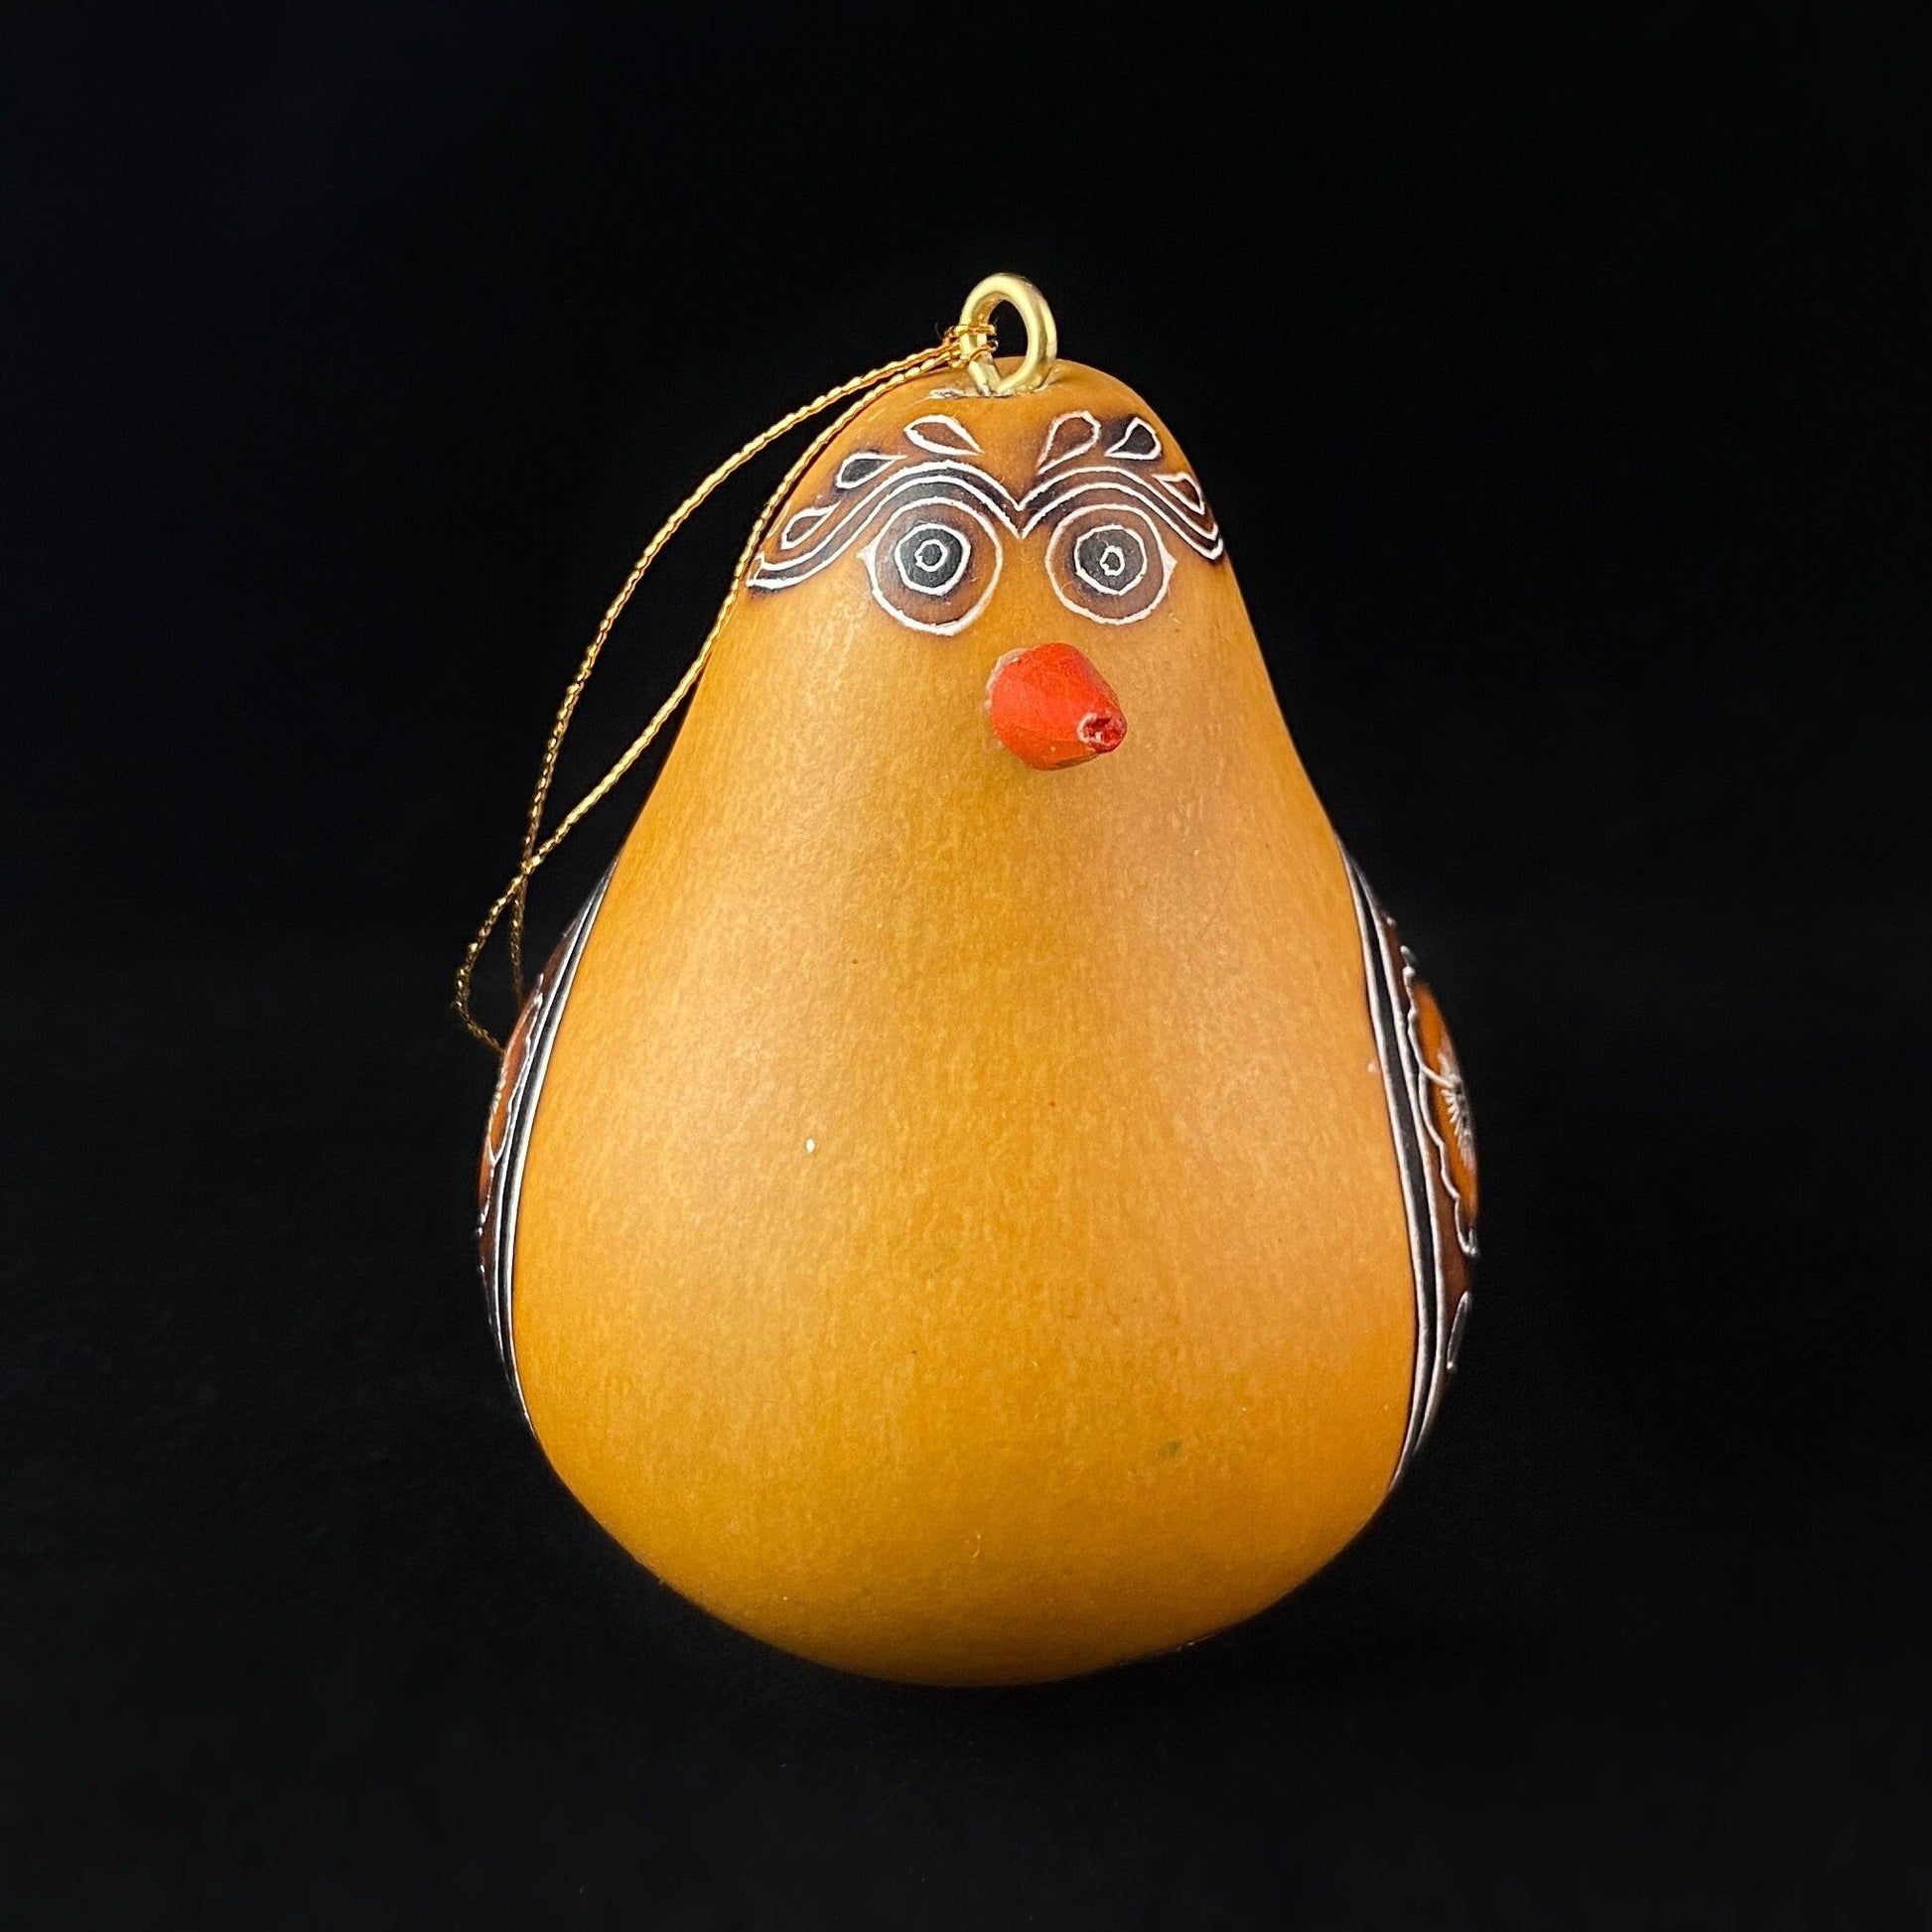 Decorative Yellow Bird Ornament/Maraca - Hand-Carved and Hand Painted Peruvian Gourd